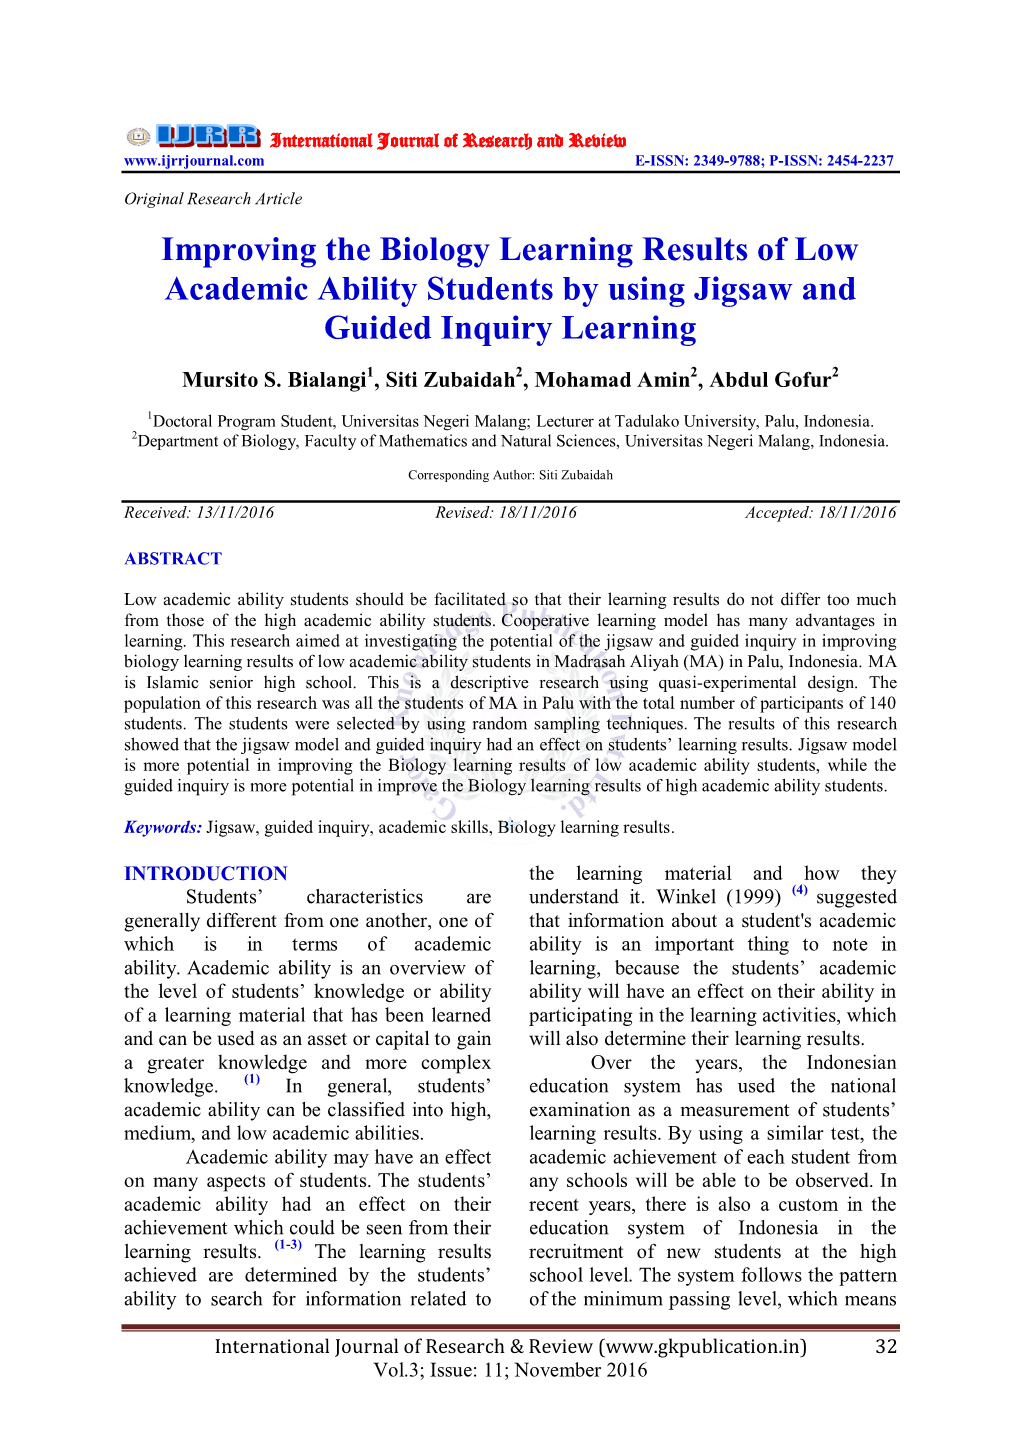 Improving the Biology Learning Results of Low Academic Ability Students by Using Jigsaw and Guided Inquiry Learning